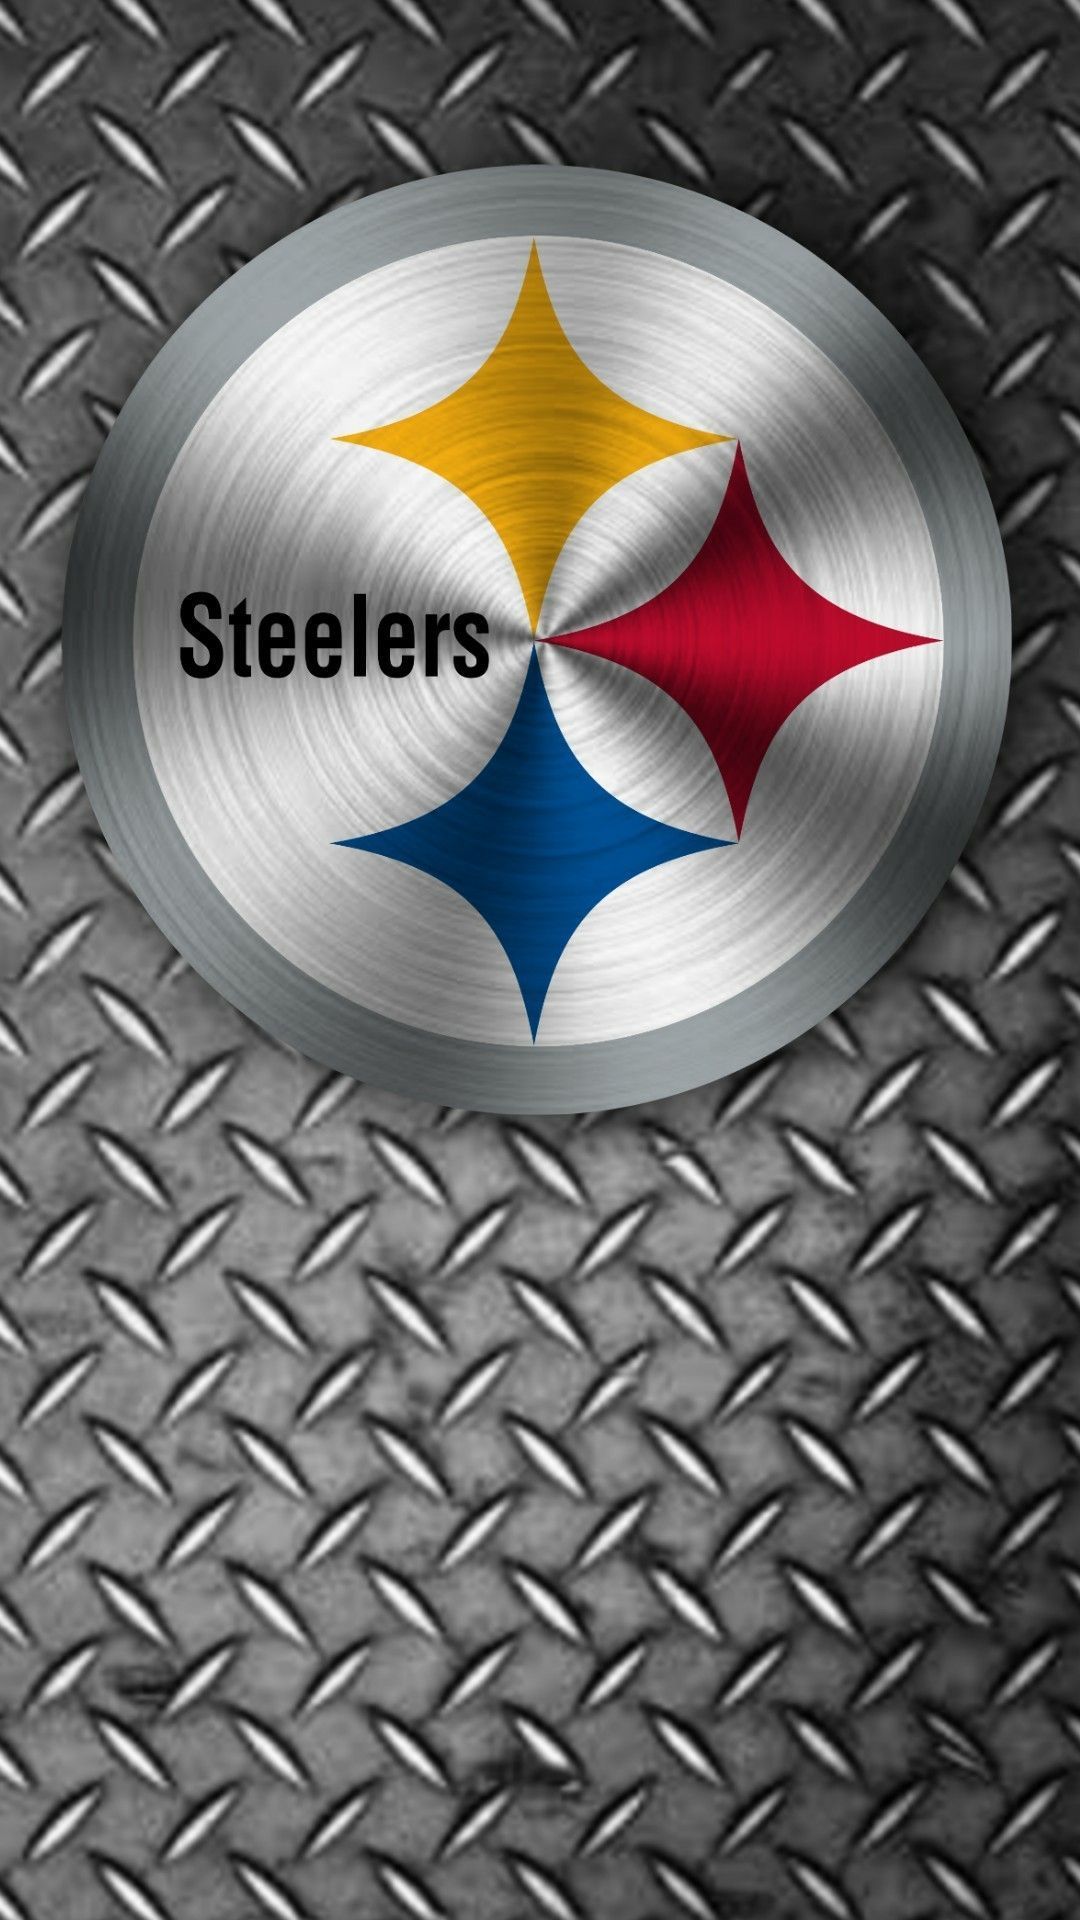 Download Steelers Wallpaper HD On High Quality Wallpaper on HDWallpaper9.com. #iphon. Pittsburgh steelers wallpaper, Pittsburgh steelers logo, Pittsburgh steelers